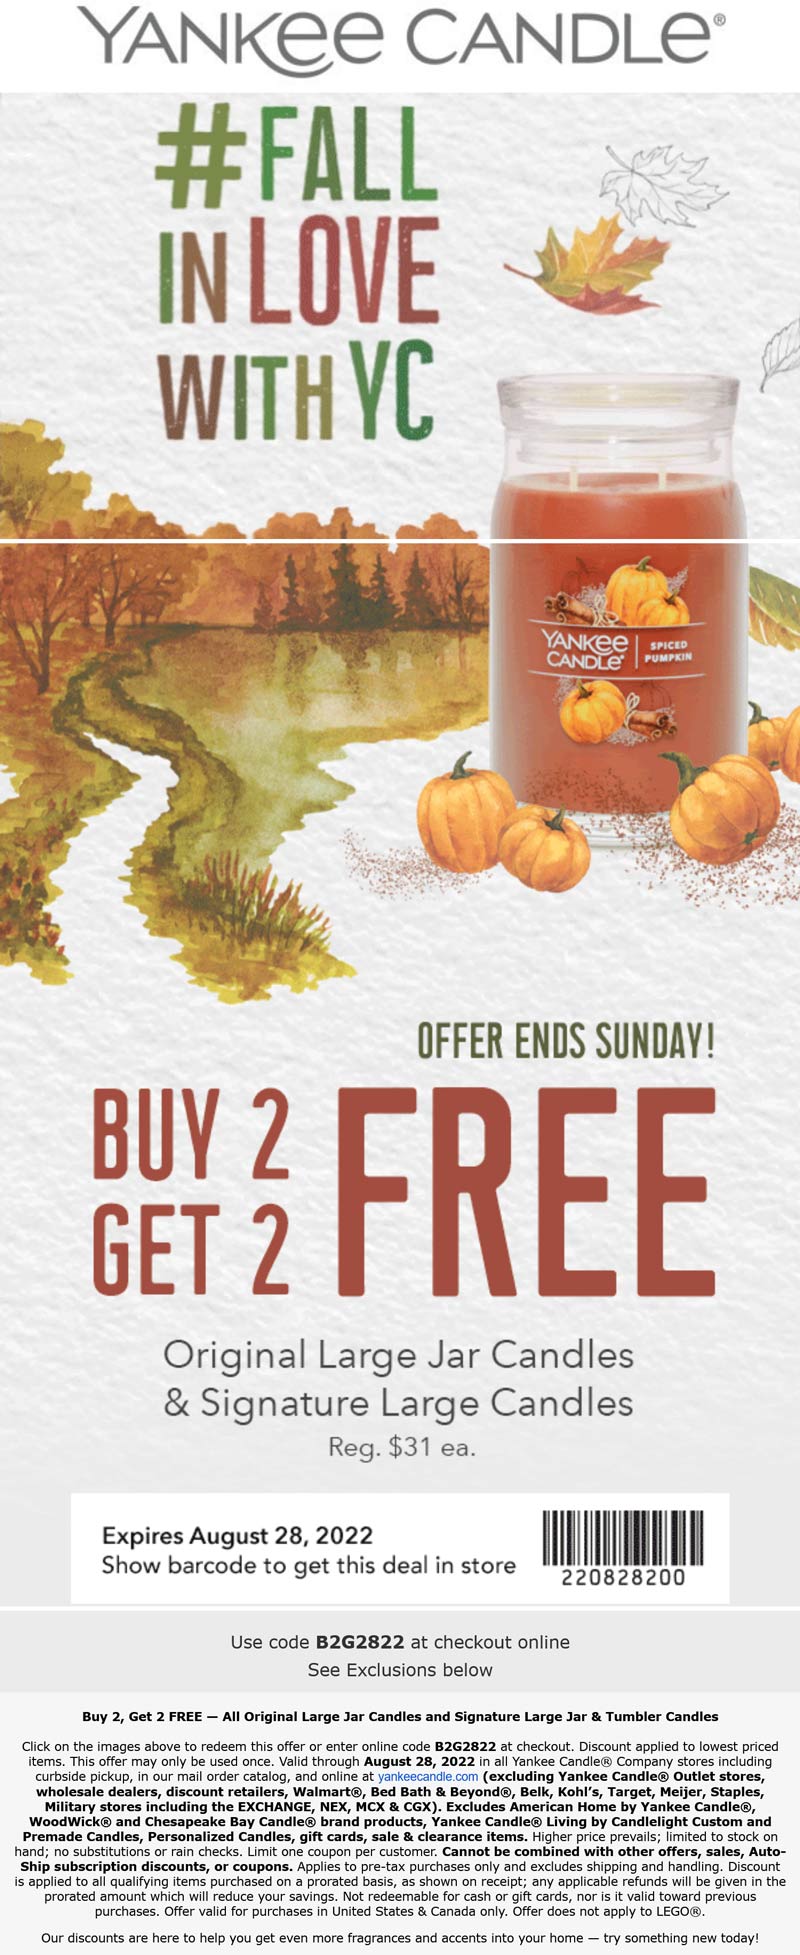 Yankee Candle stores Coupon  4-for-2 on large candles at Yankee Candle, or online via promo code B2G2822 #yankeecandle 